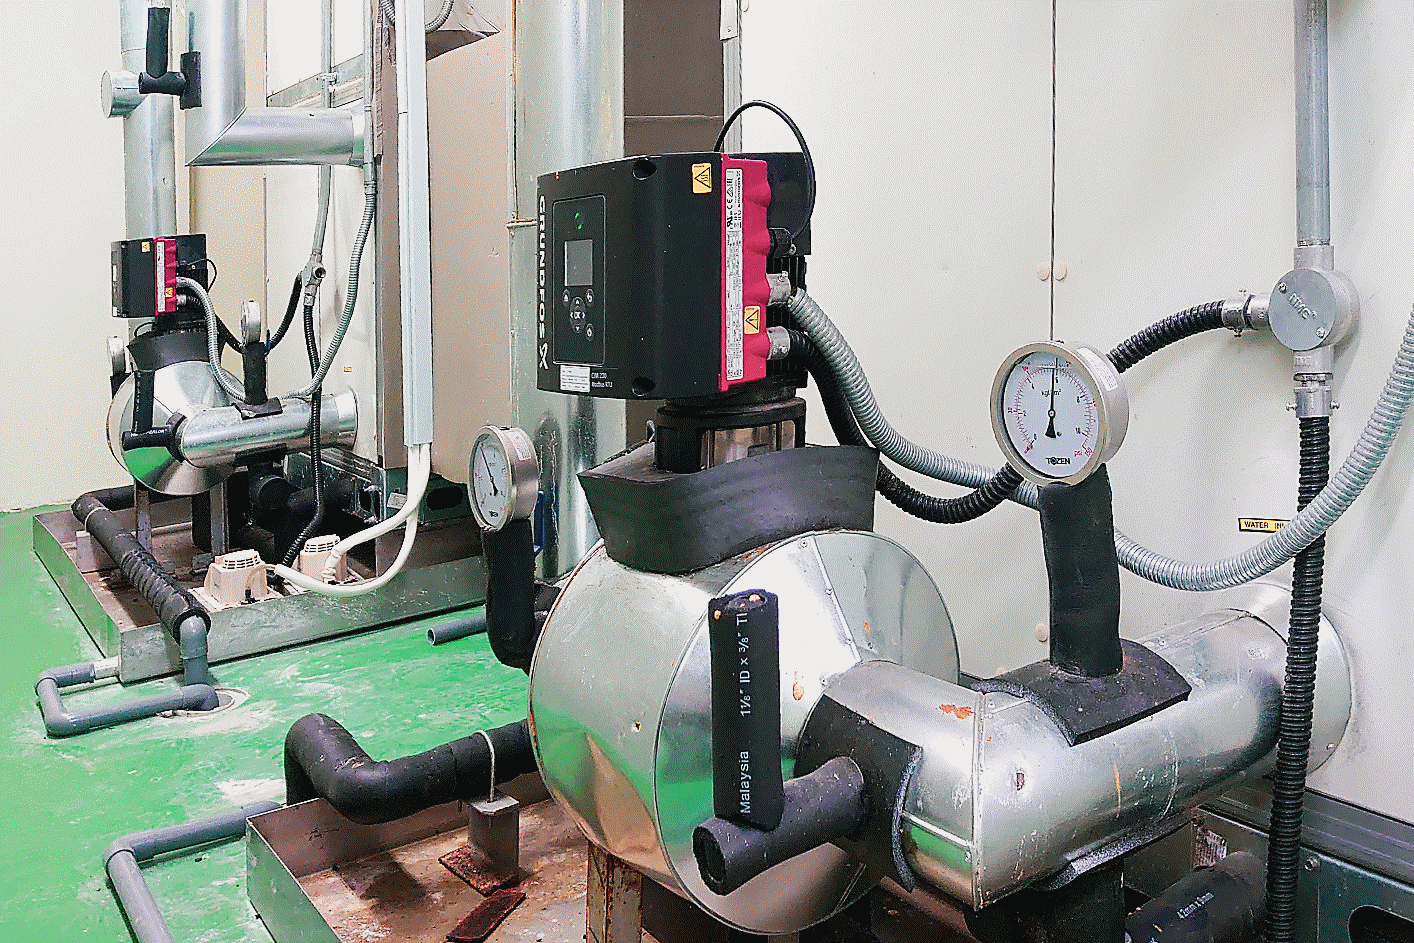 Photograph of compact pumps used to drive high-efficiency refrigeration plant